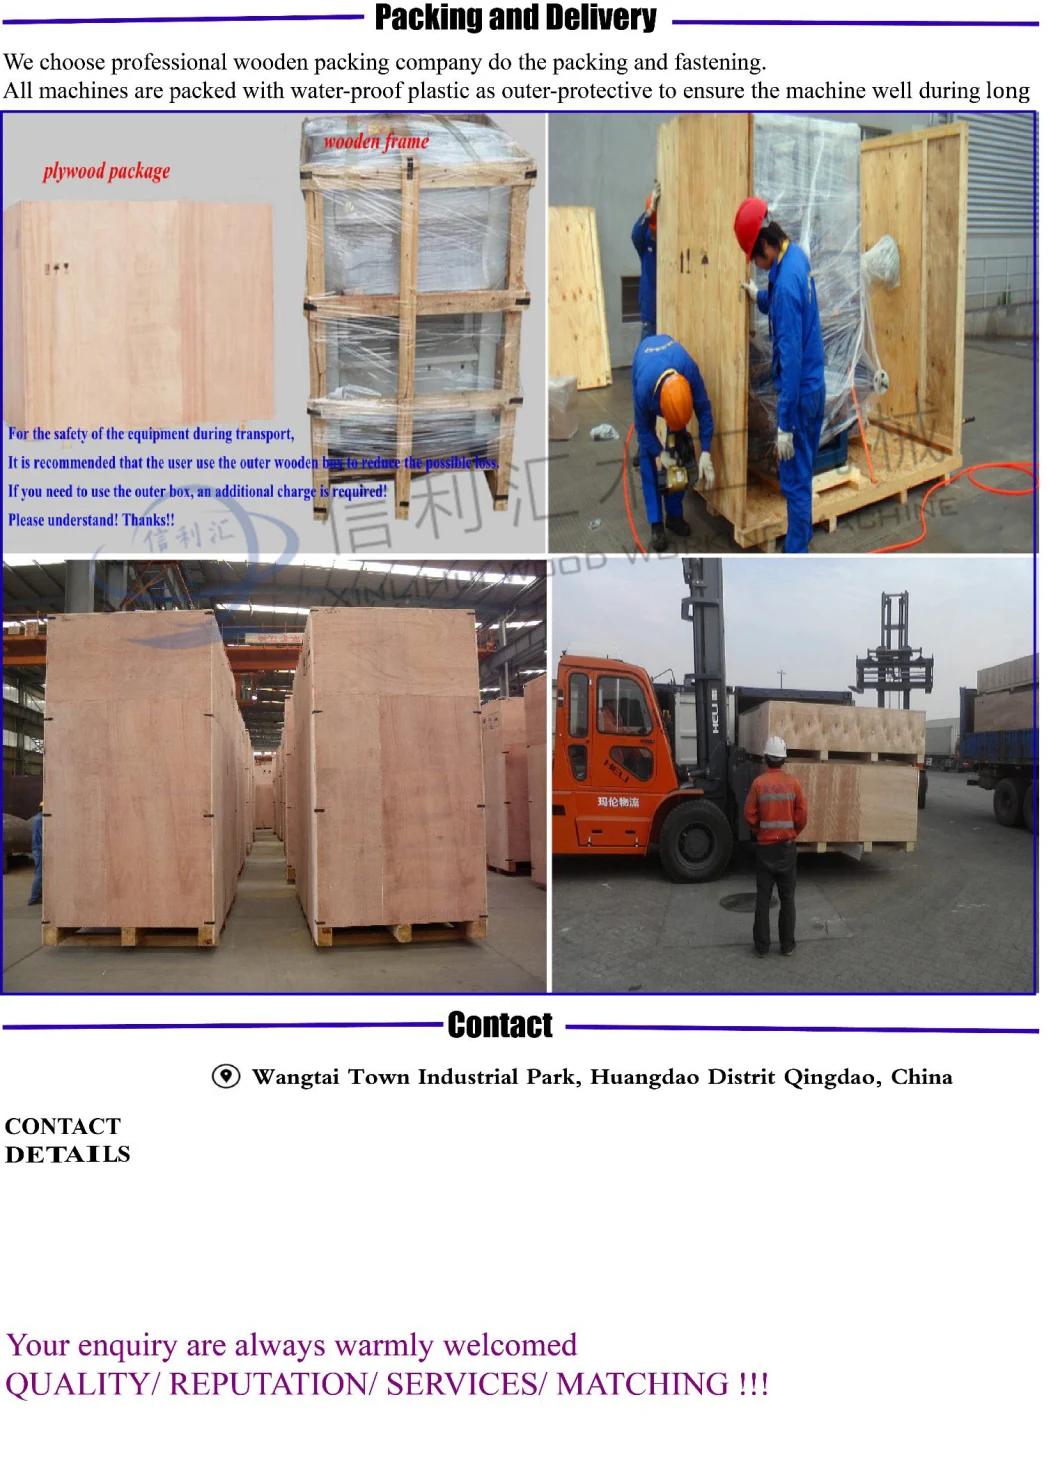 Six-Row Woodwork Drilling Density Board and Particle Board Wood Multi Boring Drilling Press Machine/ Vertical Column Bench Drilling Machine with Ce Approved